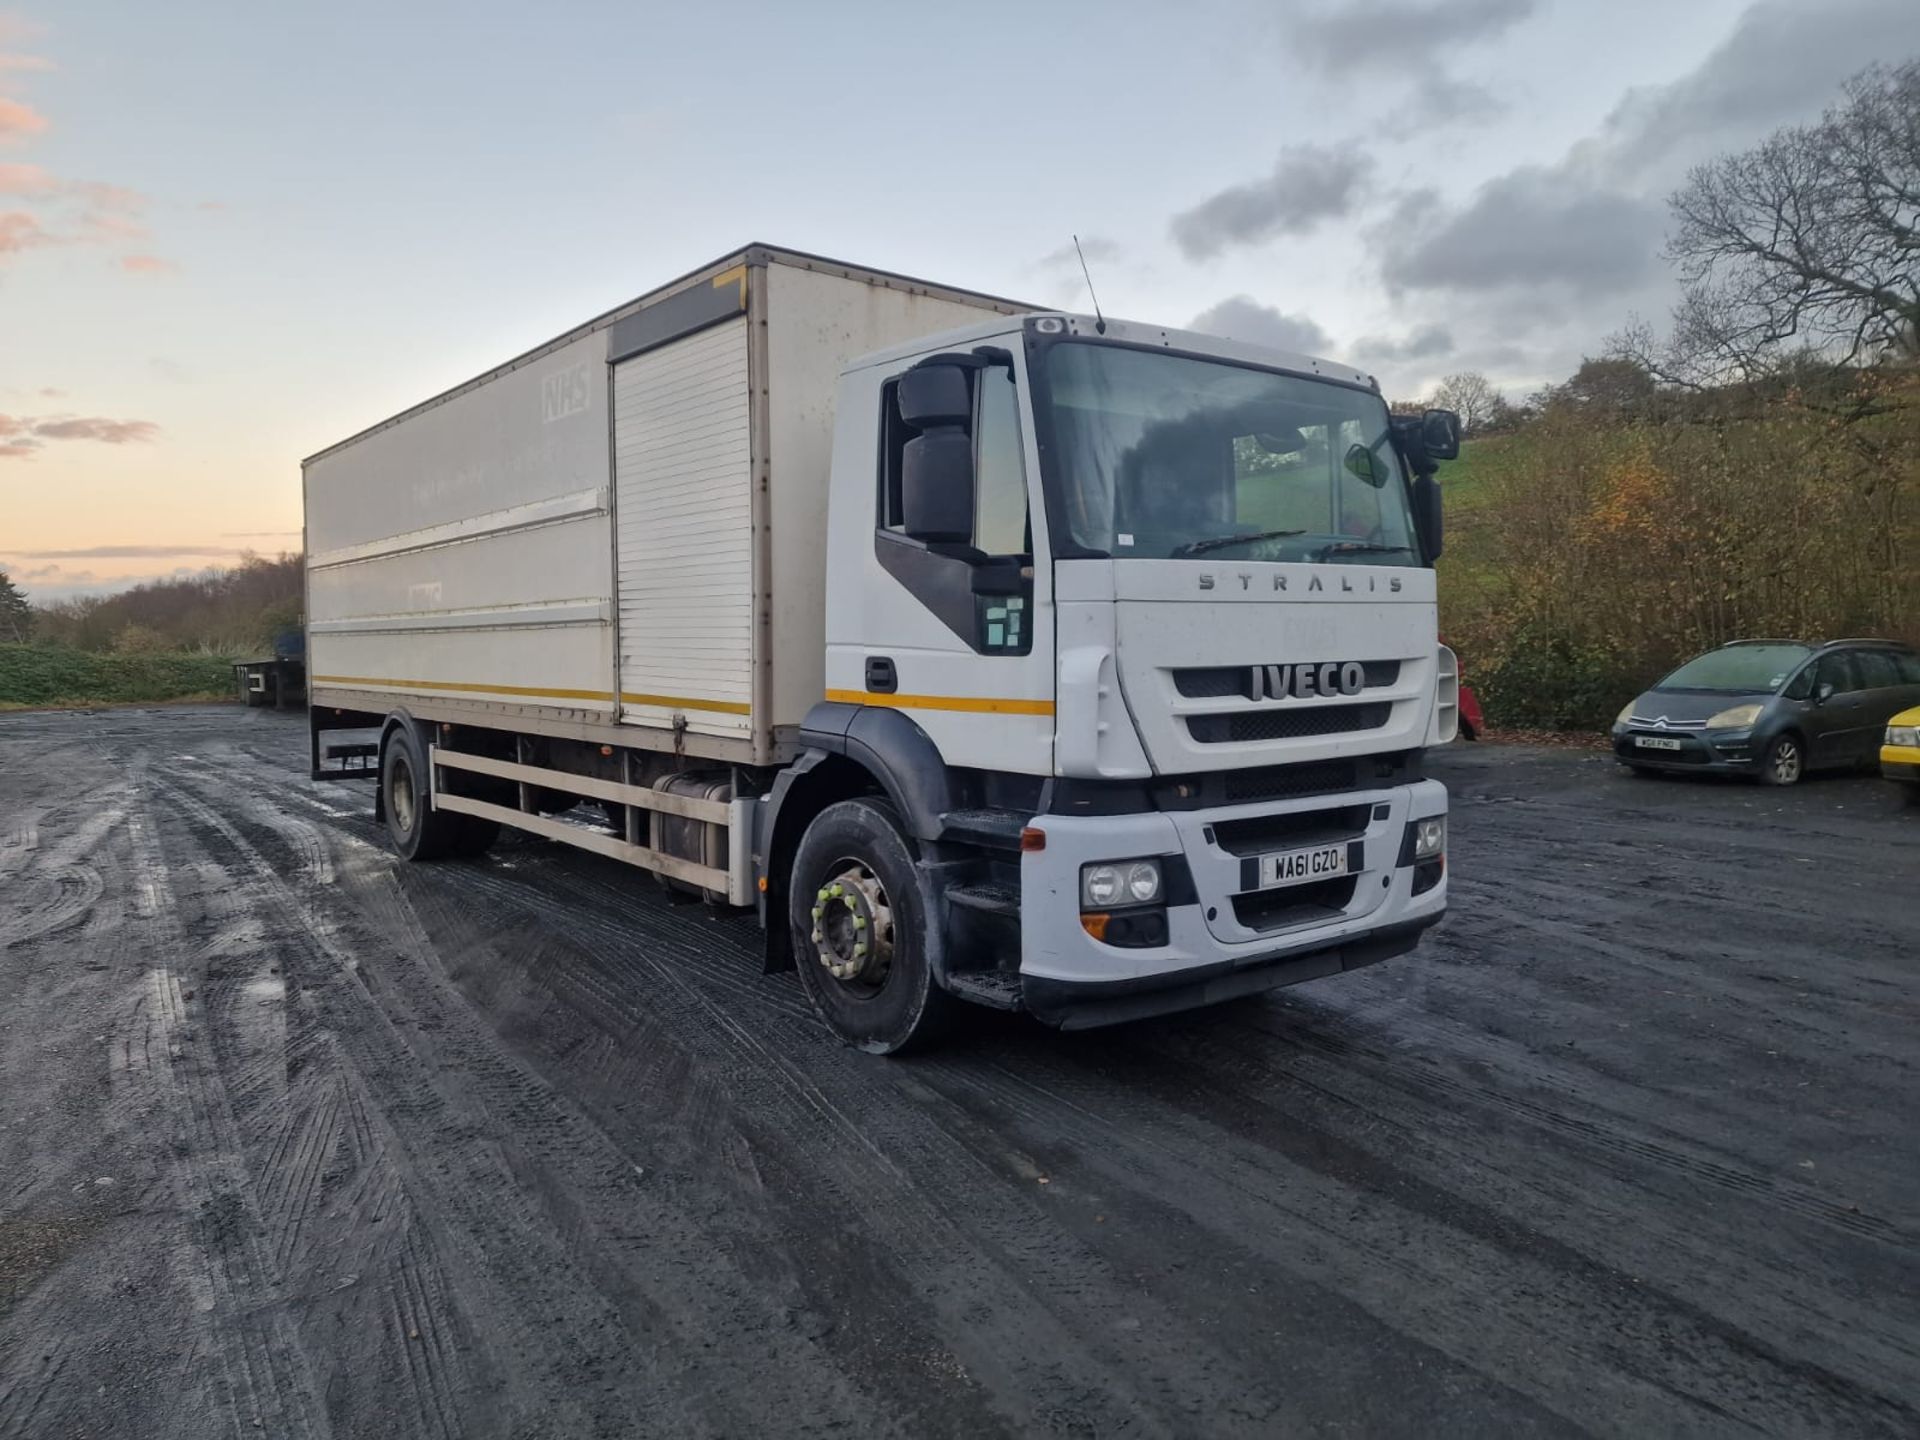 11/61 IVECO STRALIS - 7790cc 2dr Lorry (White) - Image 5 of 9